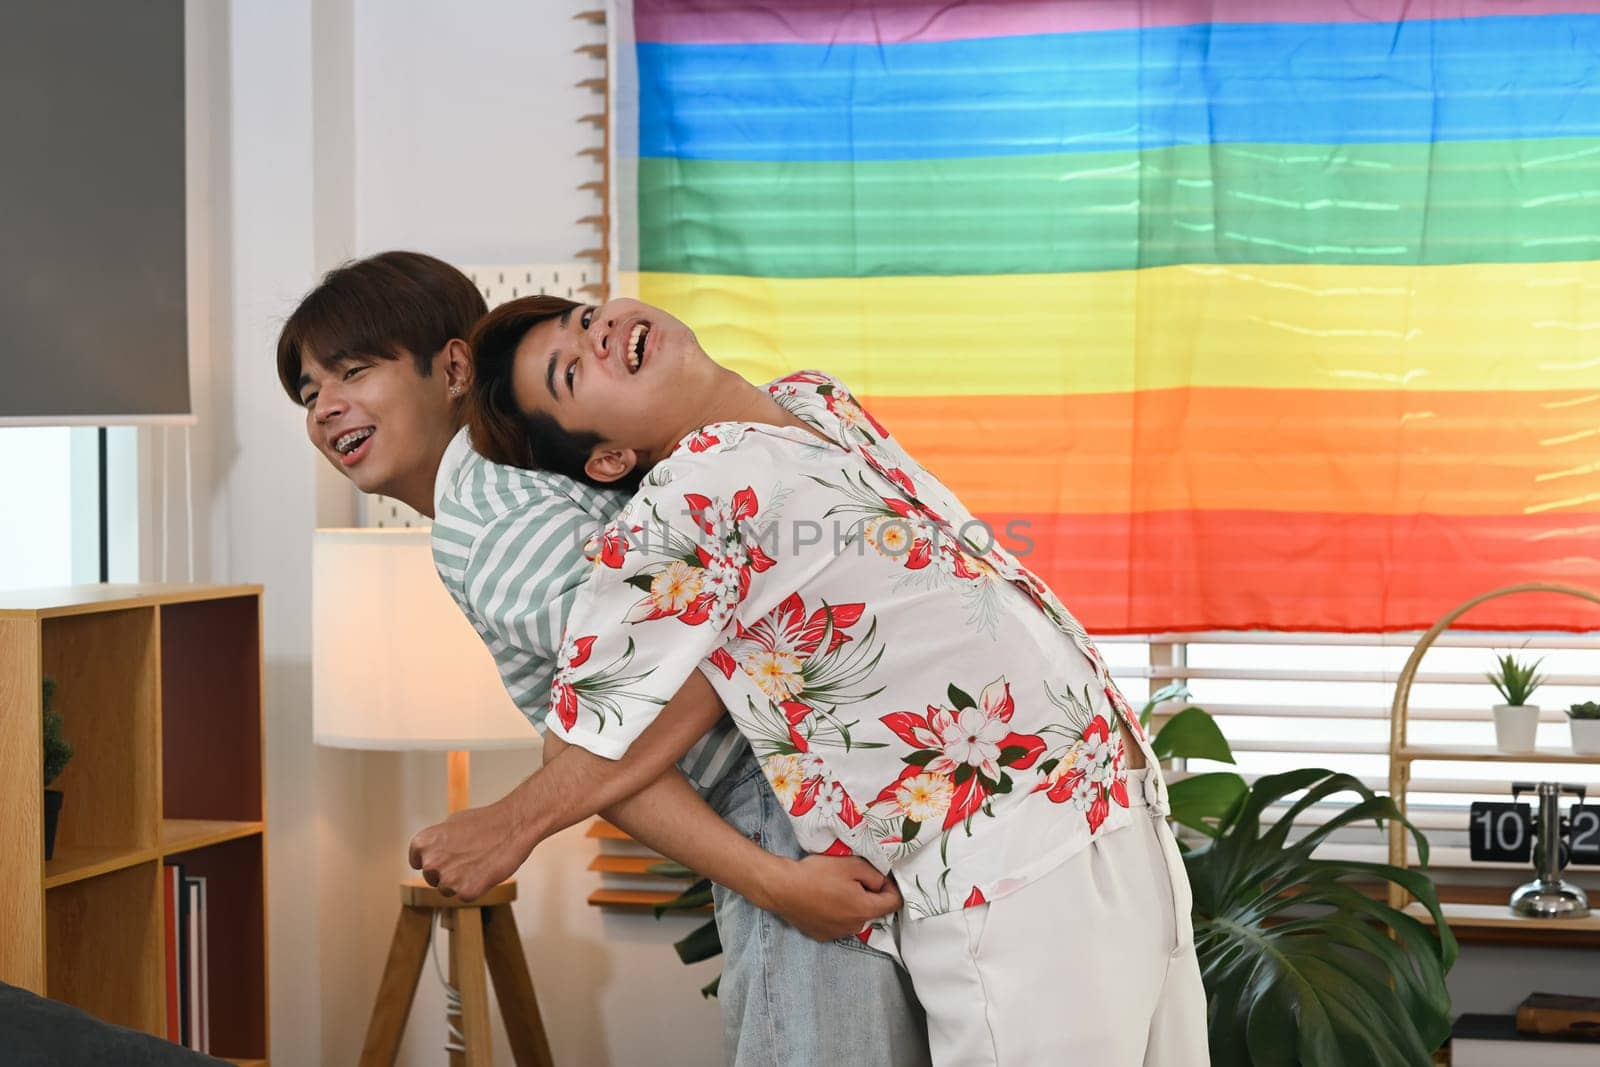 Playful gay couple giving piggyback ride for each other laugh joyfully in living room near rainbow LGBT Pride flag.